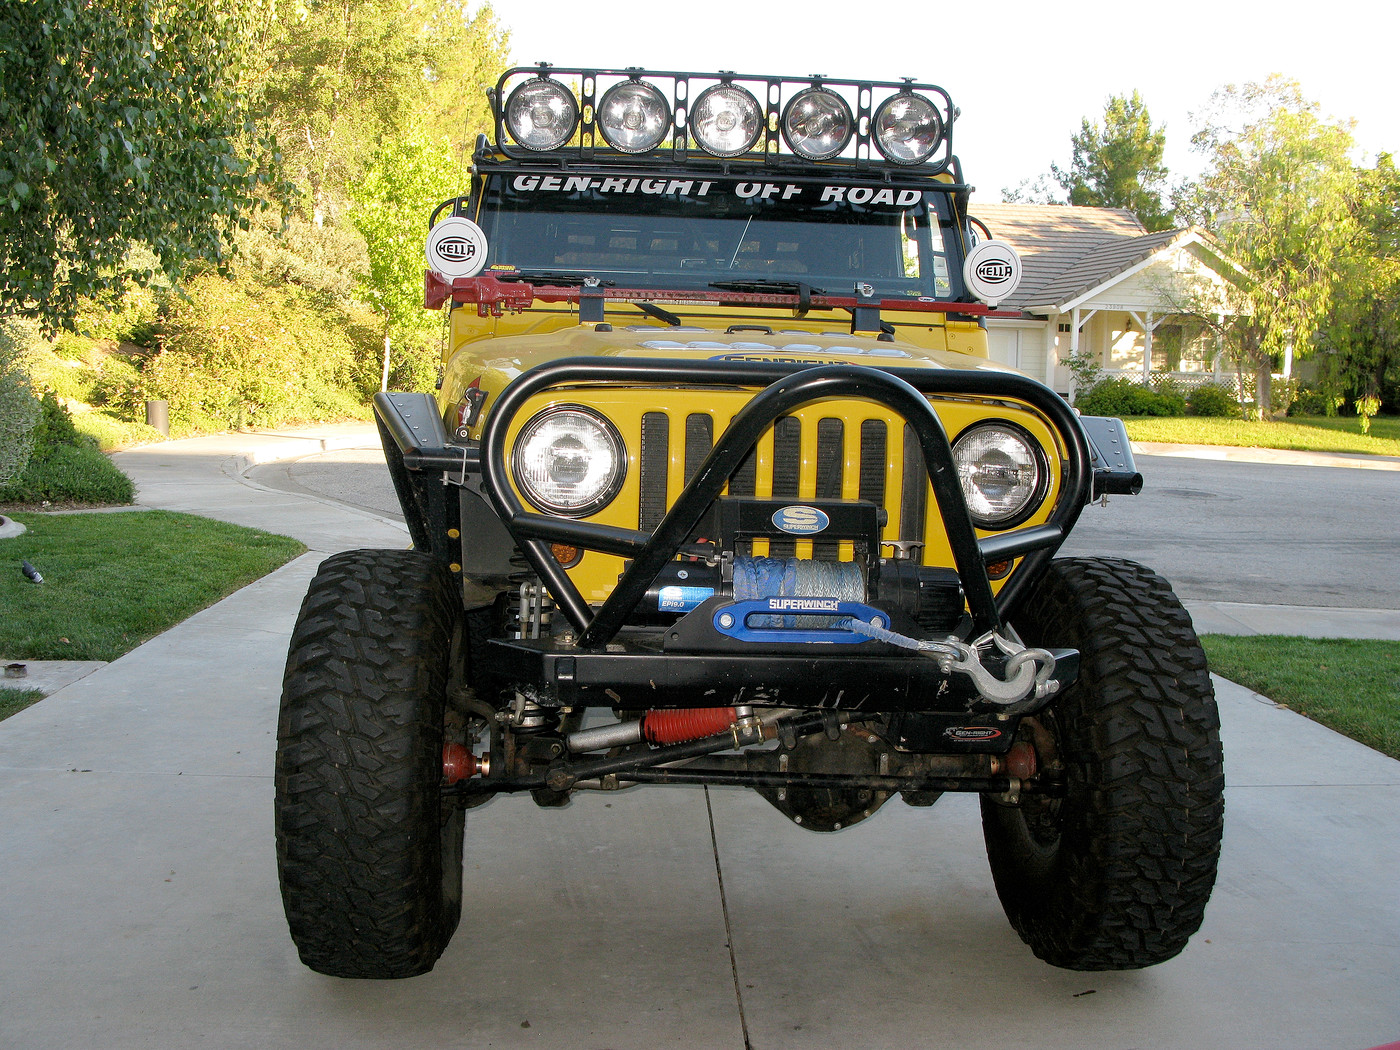 Tnt customs and jeep